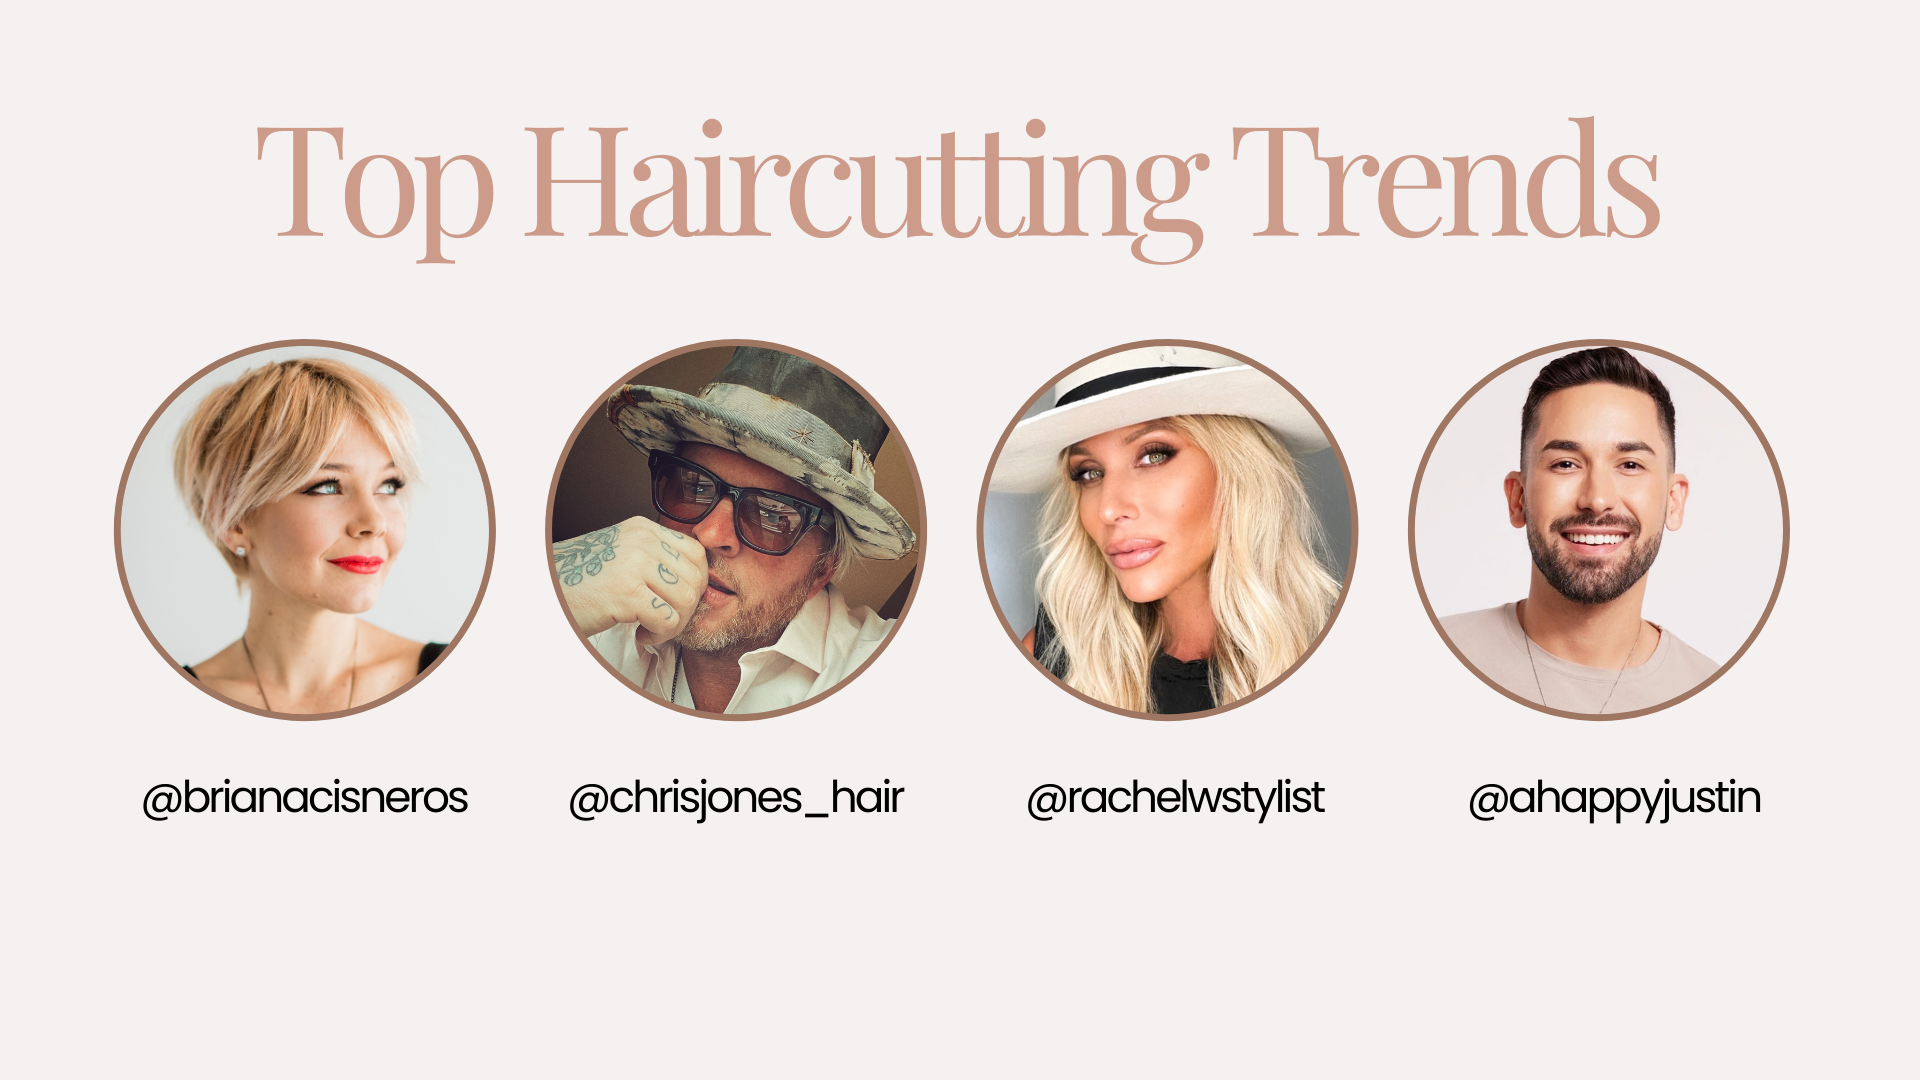 Top Haircutting Trends